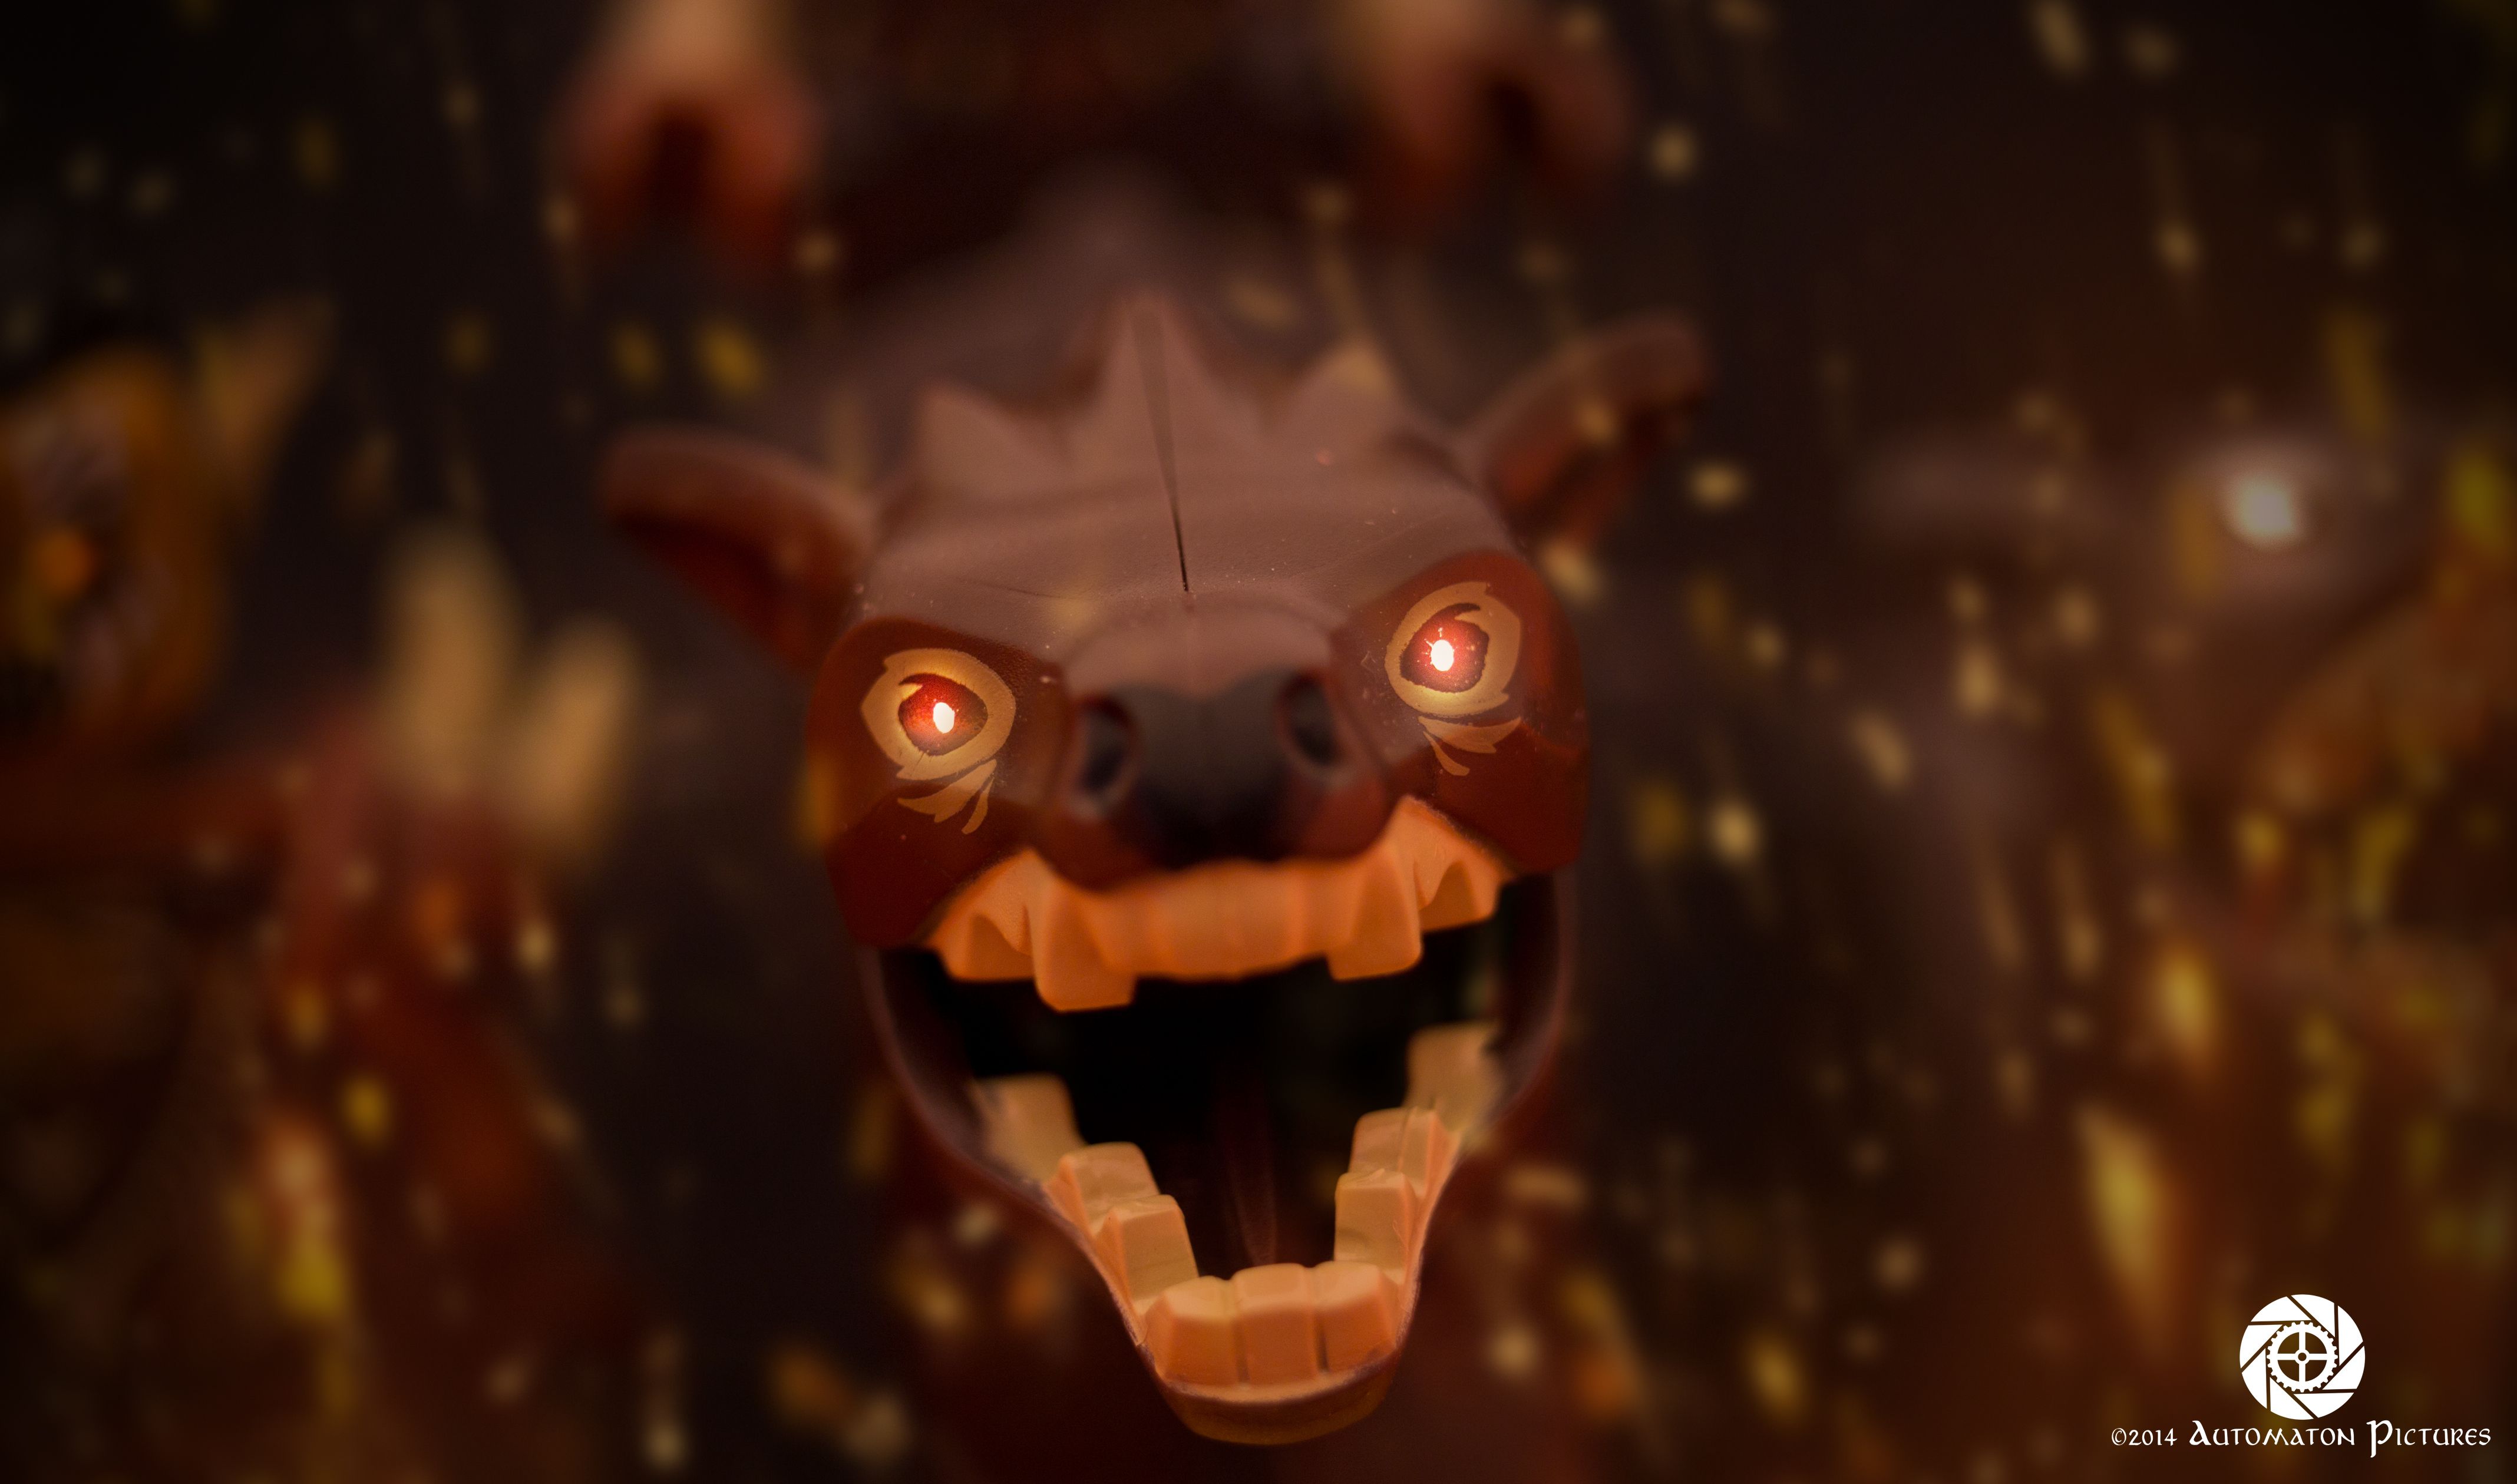 Wallpaper, night, LEGO, wolf, Toy, evil, Orc, orcs, Automaton, animal, wild, darkness, picture, screenshot, legography, computer wallpaper, macro photography, organism, autopic, wargs, orcish, gundabad 4272x2519